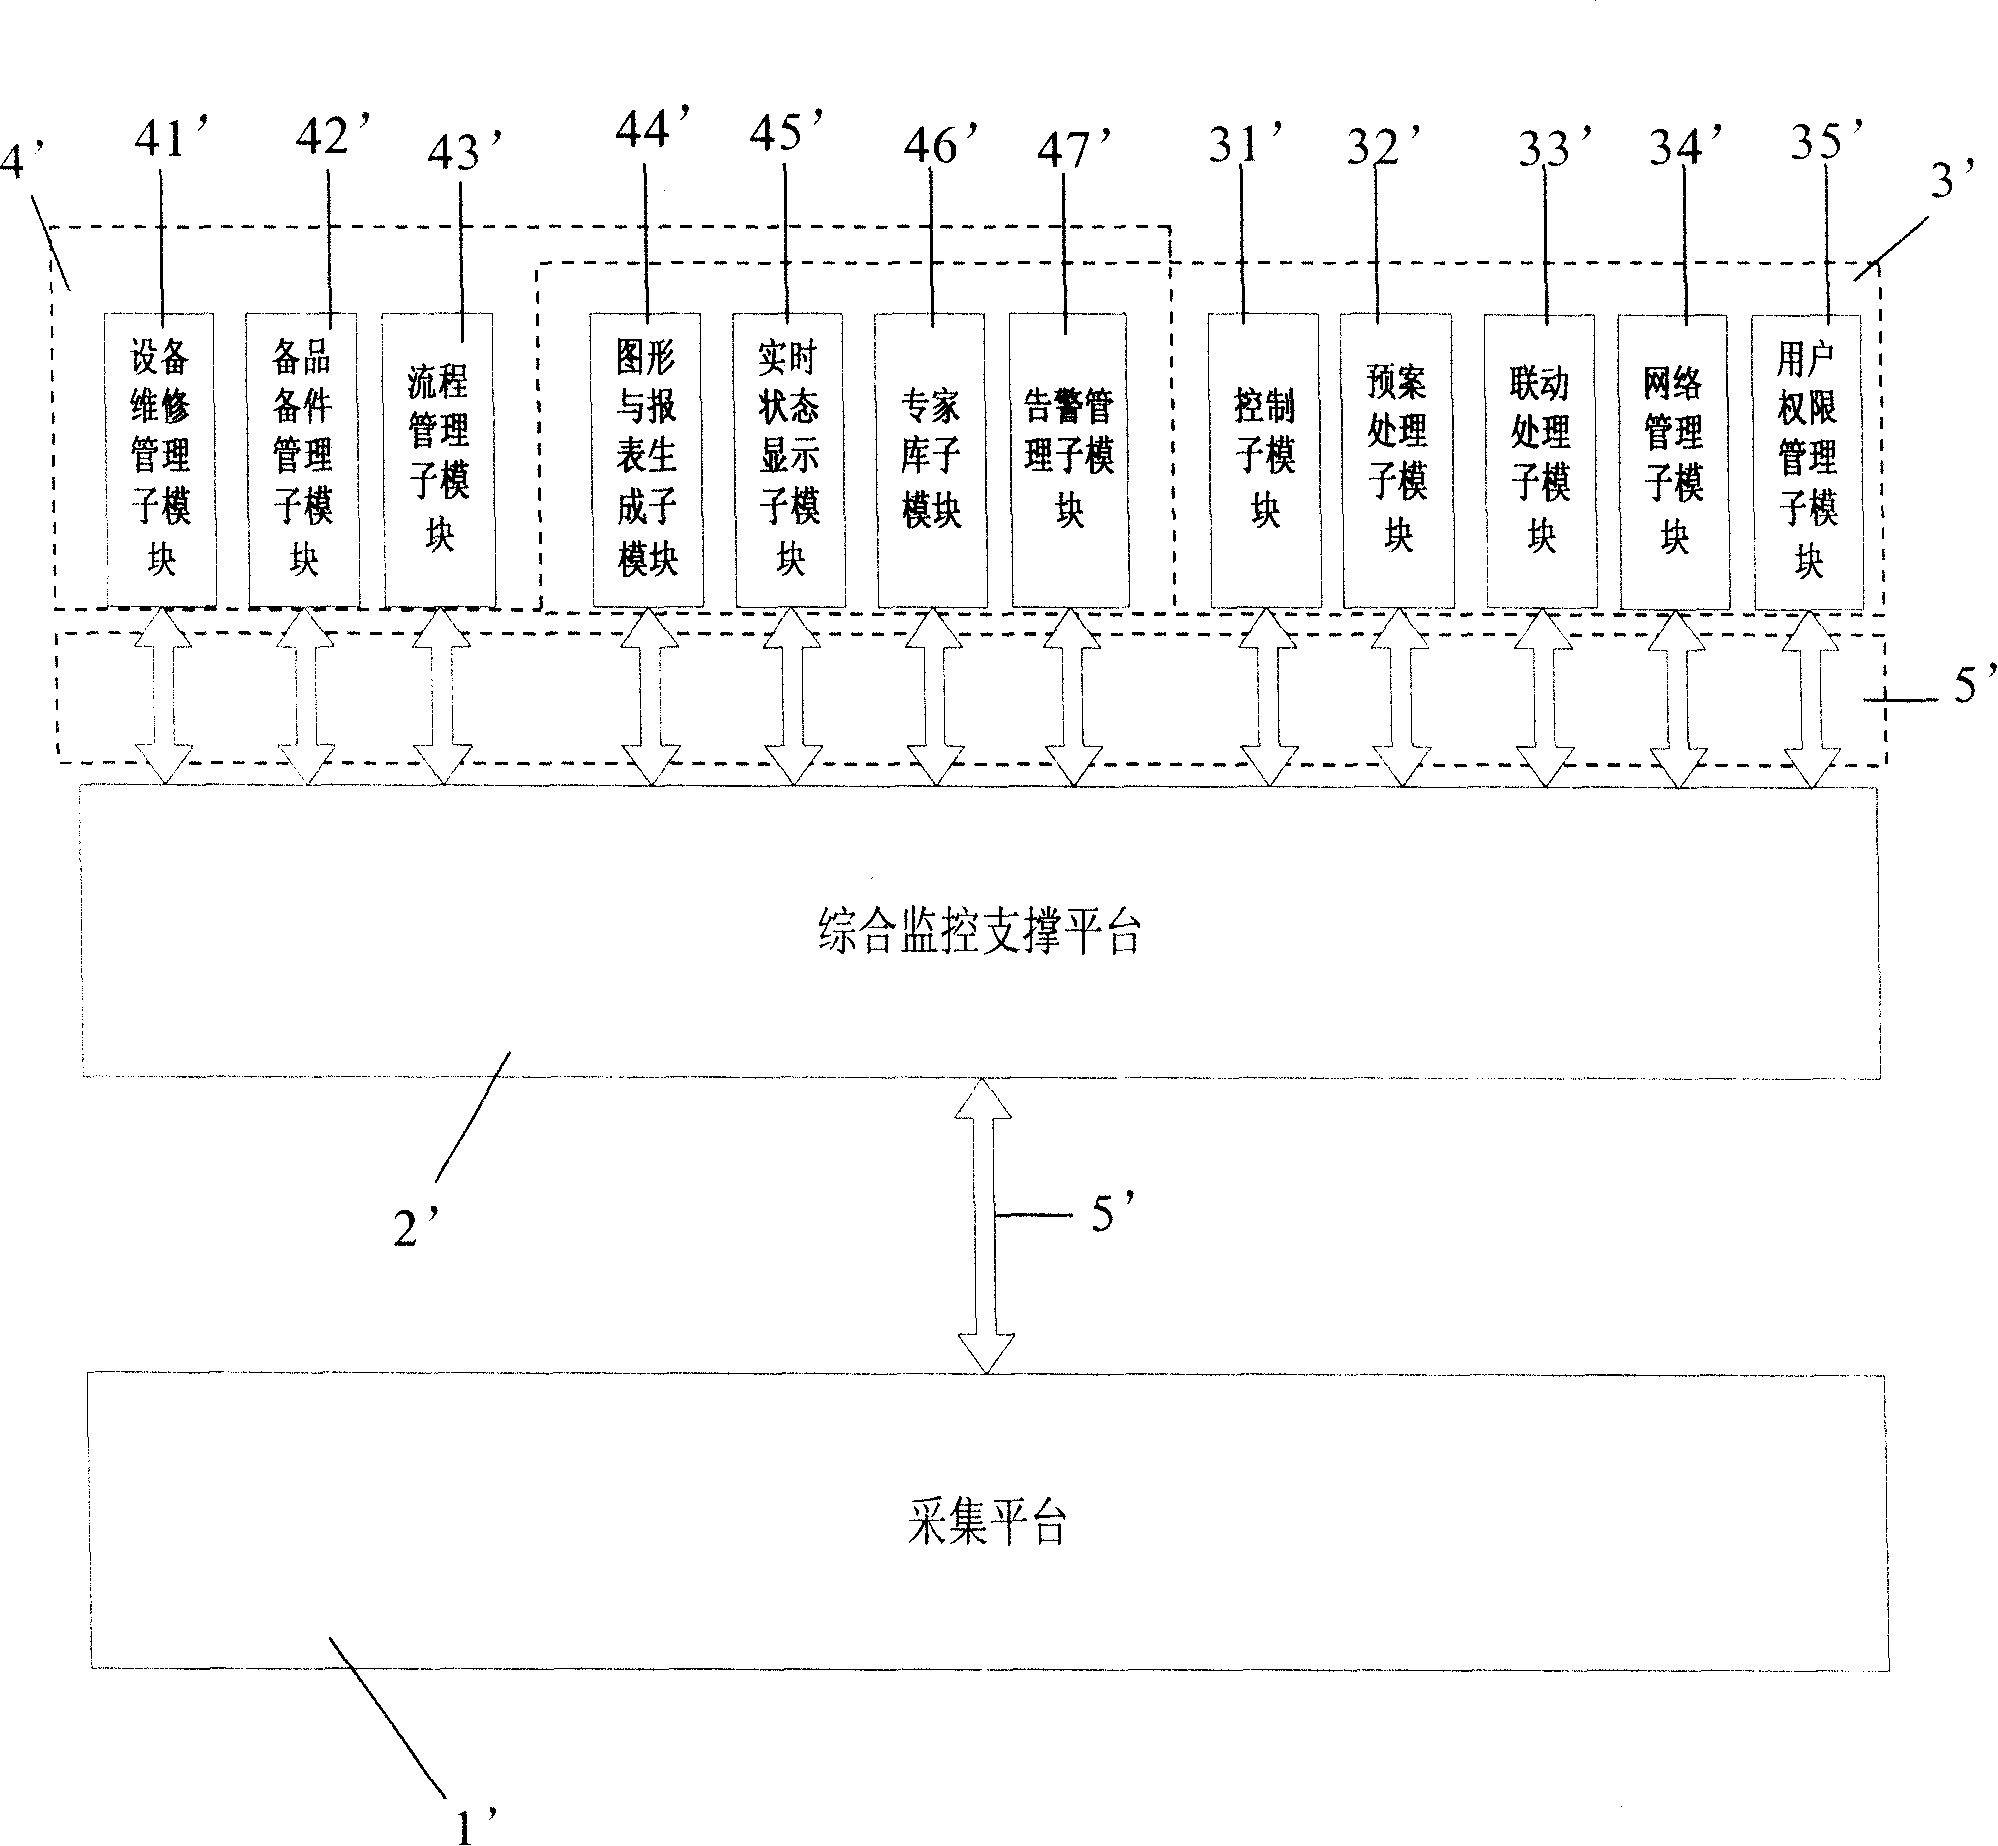 Track traffic synthetic monitoring system and method